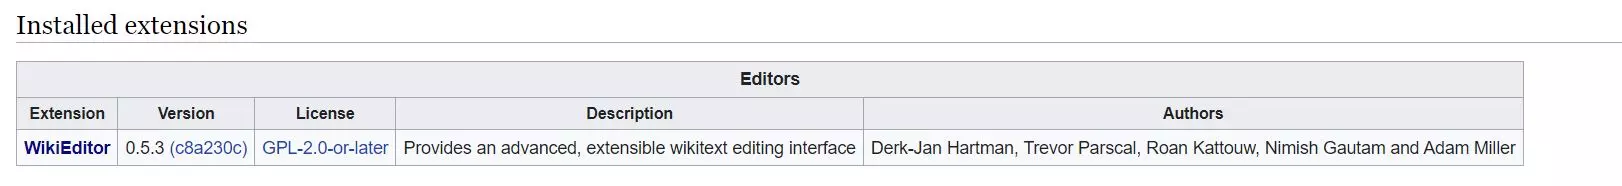 MediaWiki Installed Extensions Example